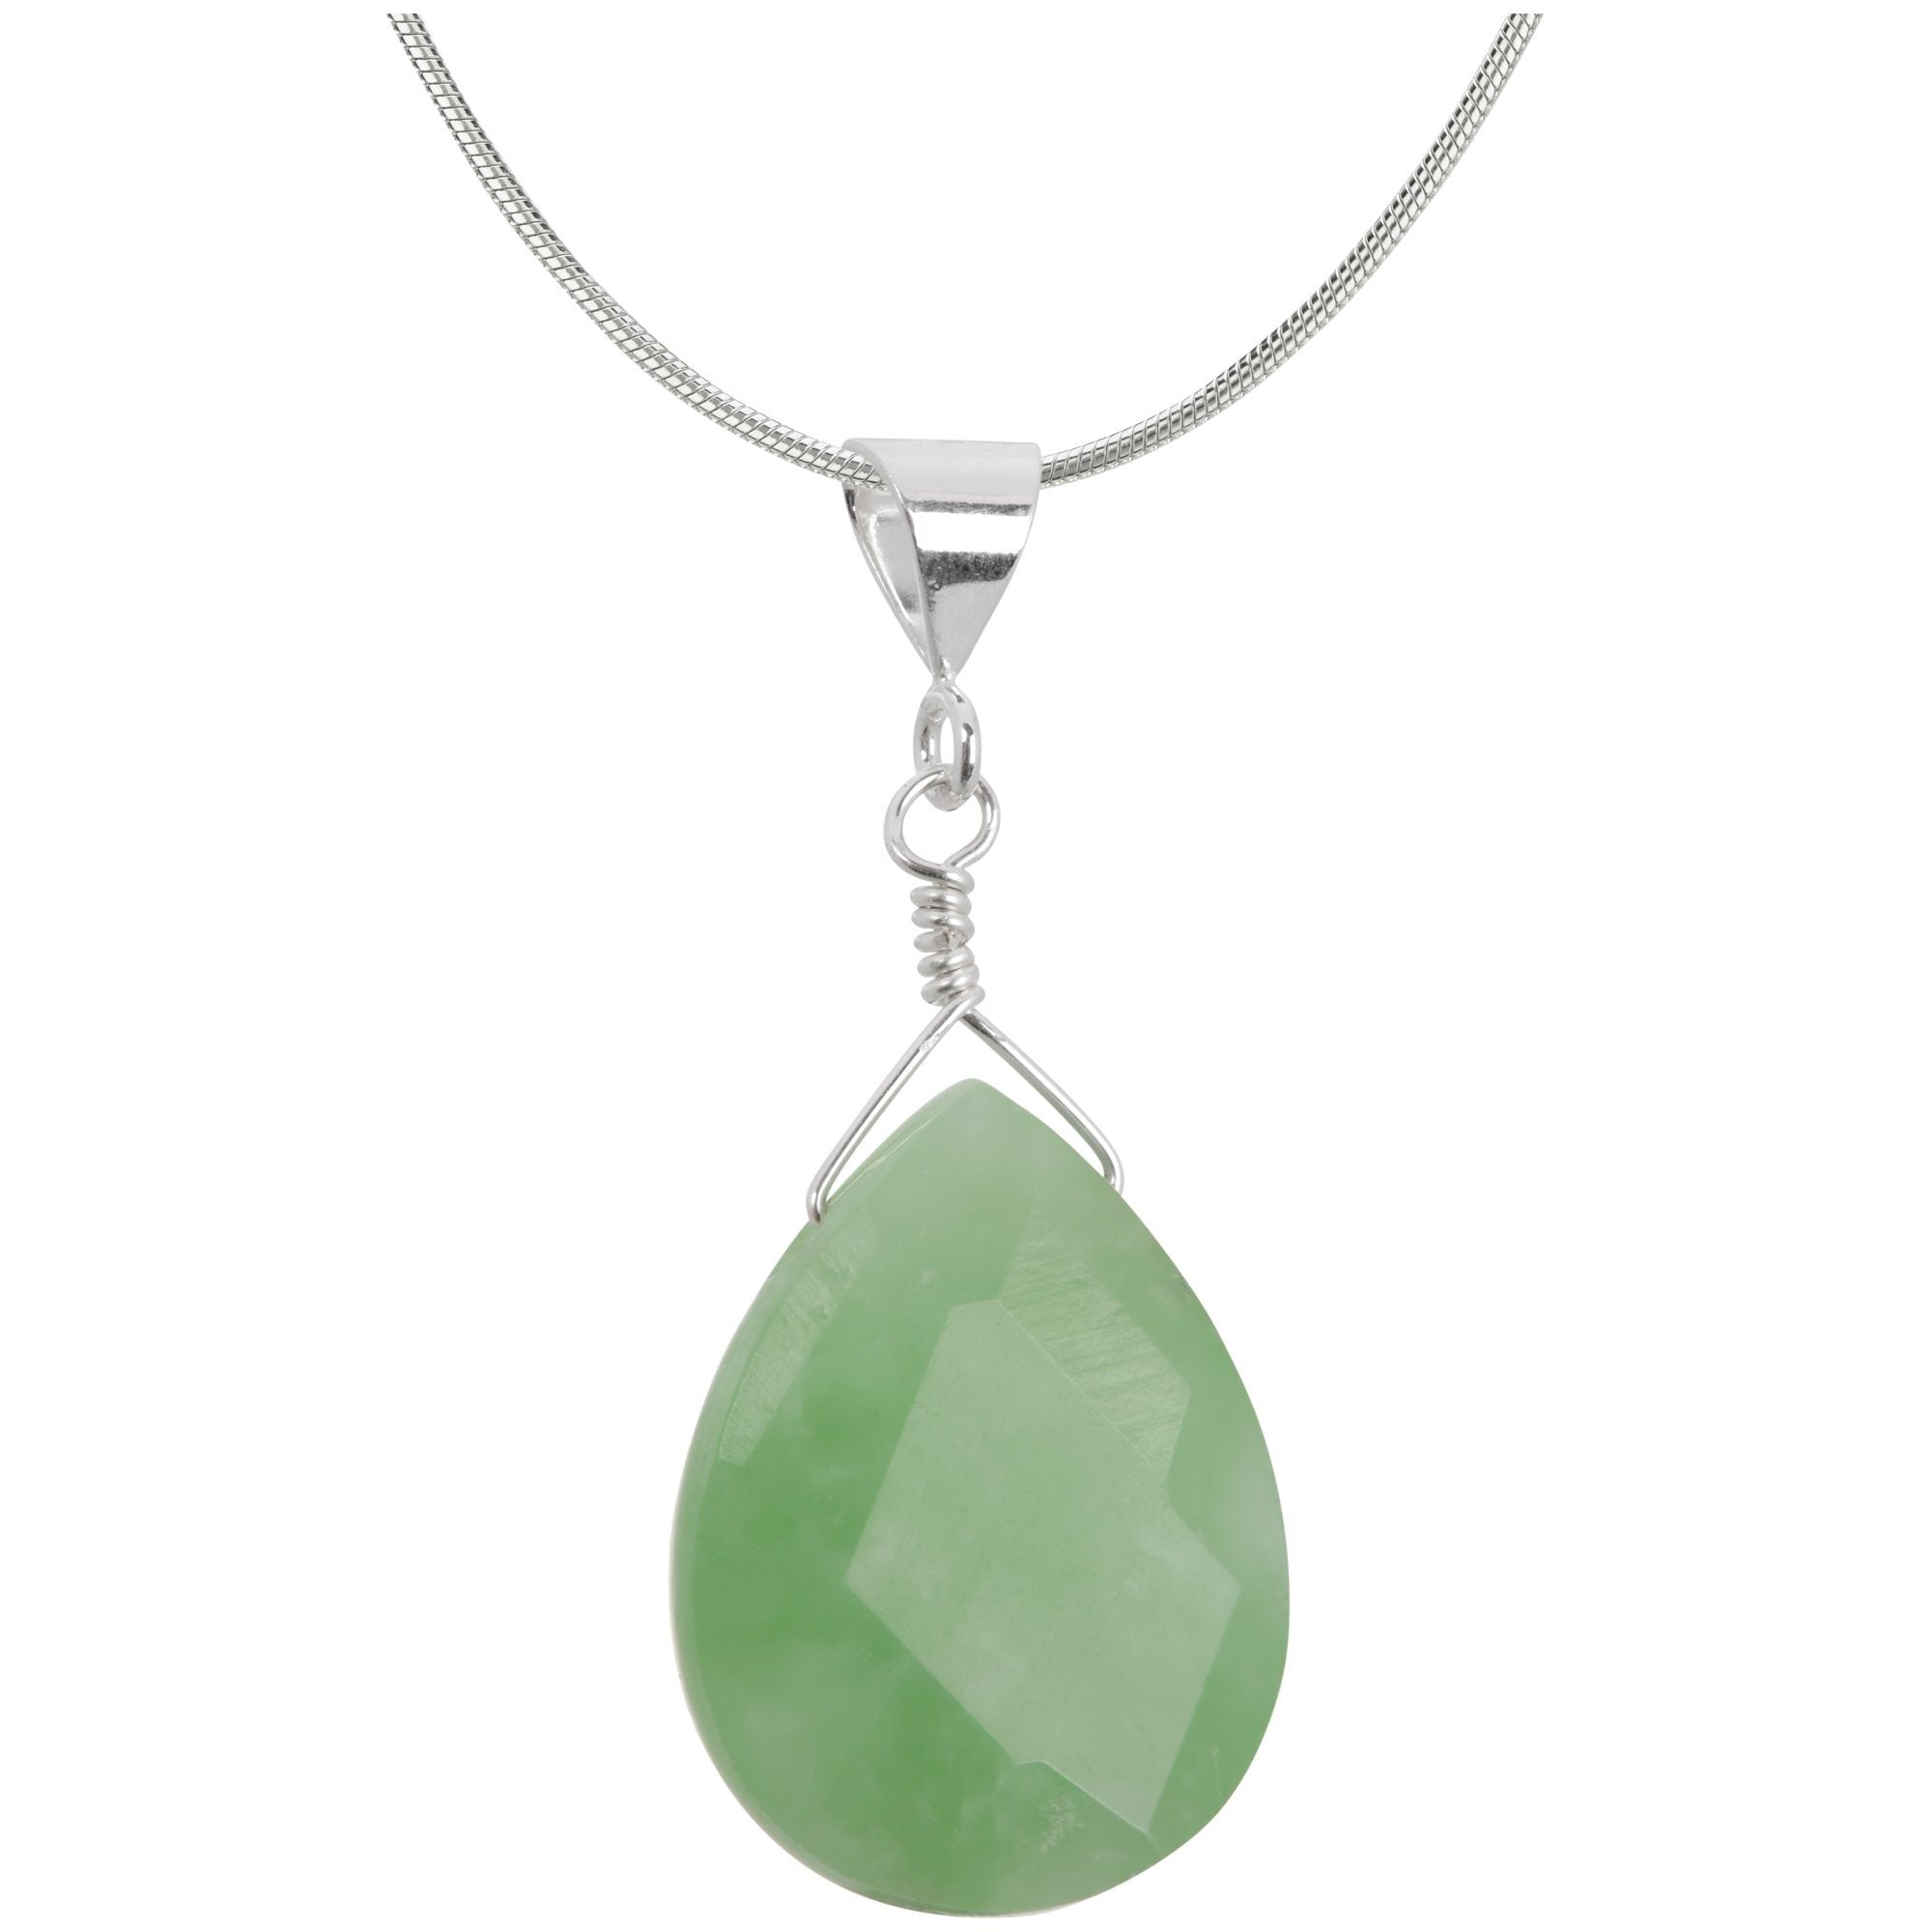 Simple Faceted Gemstone & Sterling Necklace - Amazonite - With Sterling Cable Chain